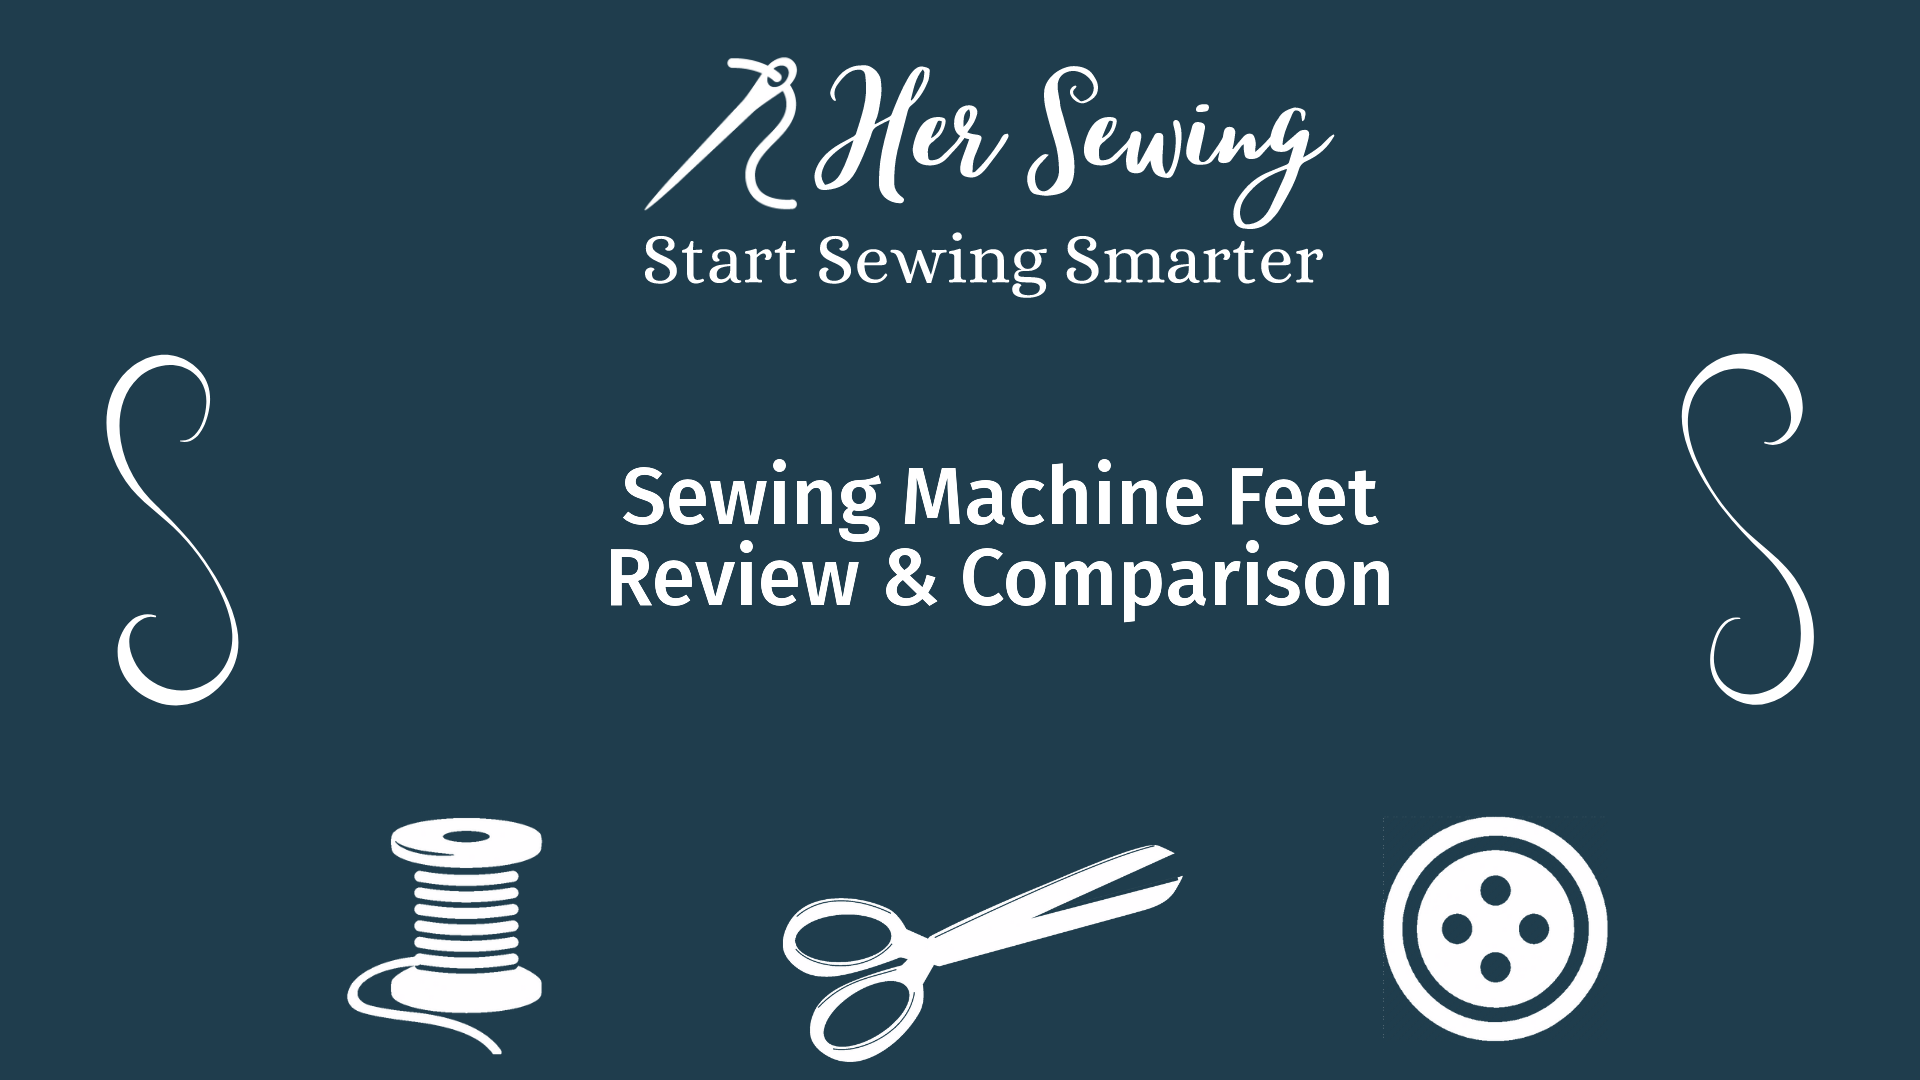 Sewing Machine Feet Review & Comparison